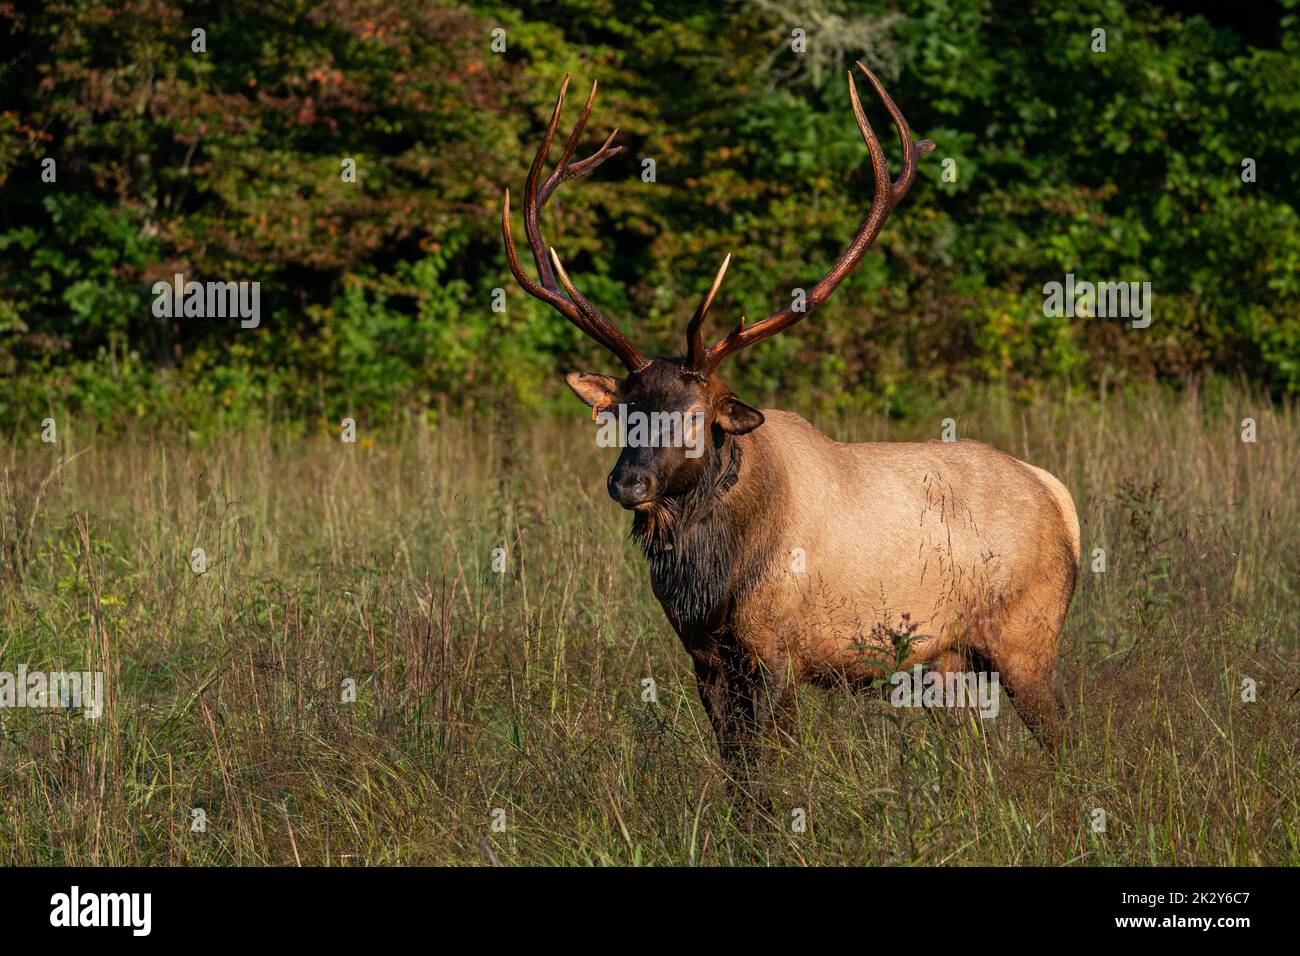 A rocky mountain elk in a stong stance. Stock Photo